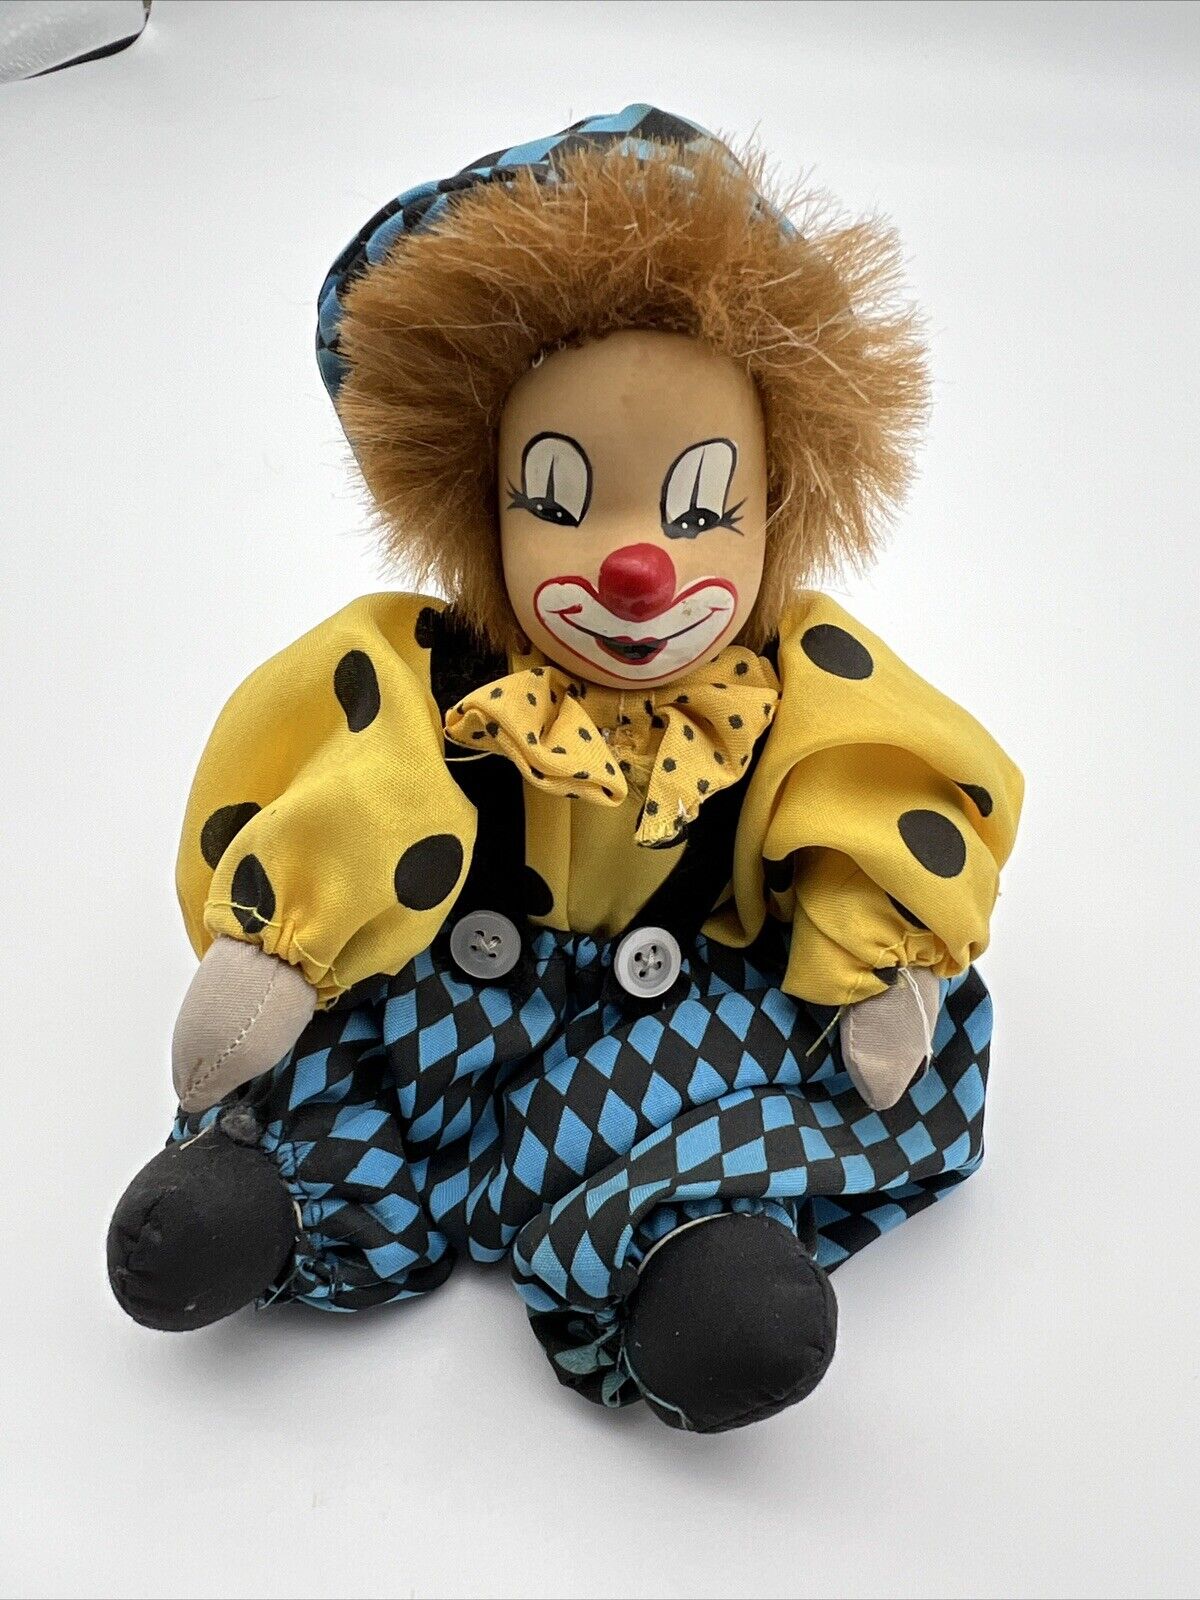 Vintage Clown Doll with Handpainted Wooden Face